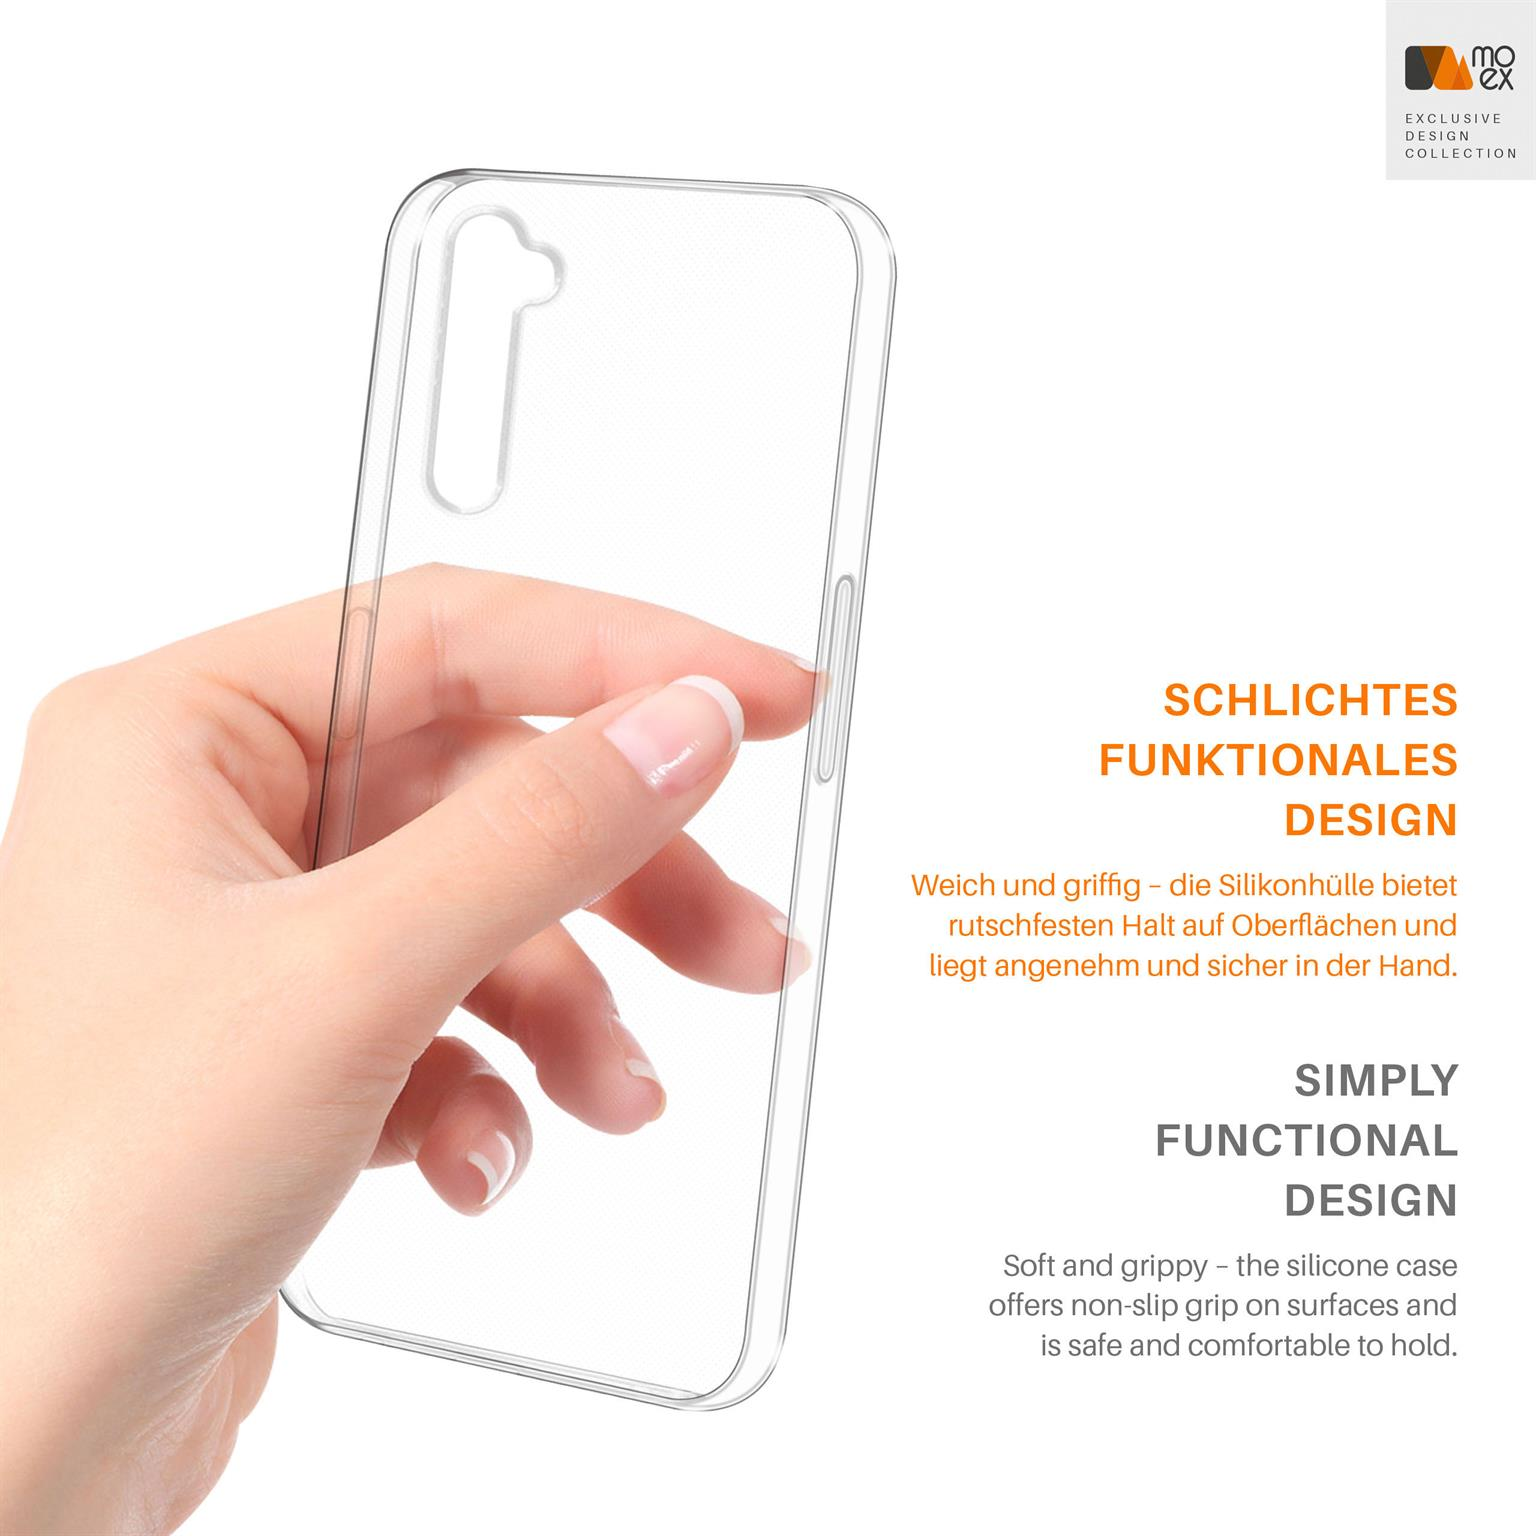 MOEX Aero Crystal-Clear Case, X50 Realme, Pro, Backcover